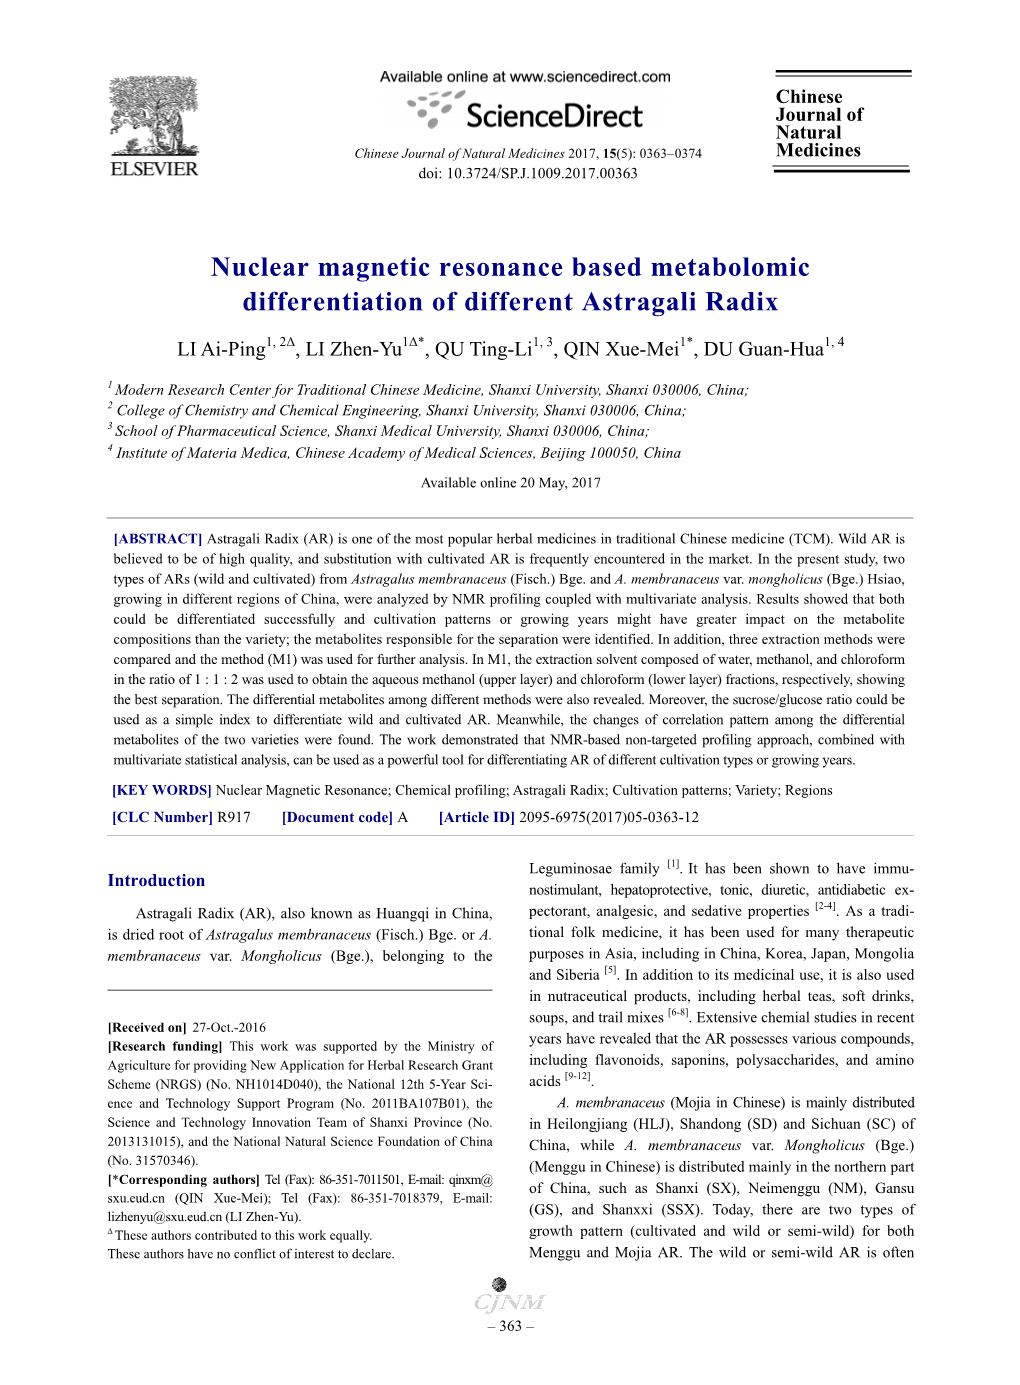 Nuclear Magnetic Resonance Based Metabolomic Differentiation of Different Astragali Radix